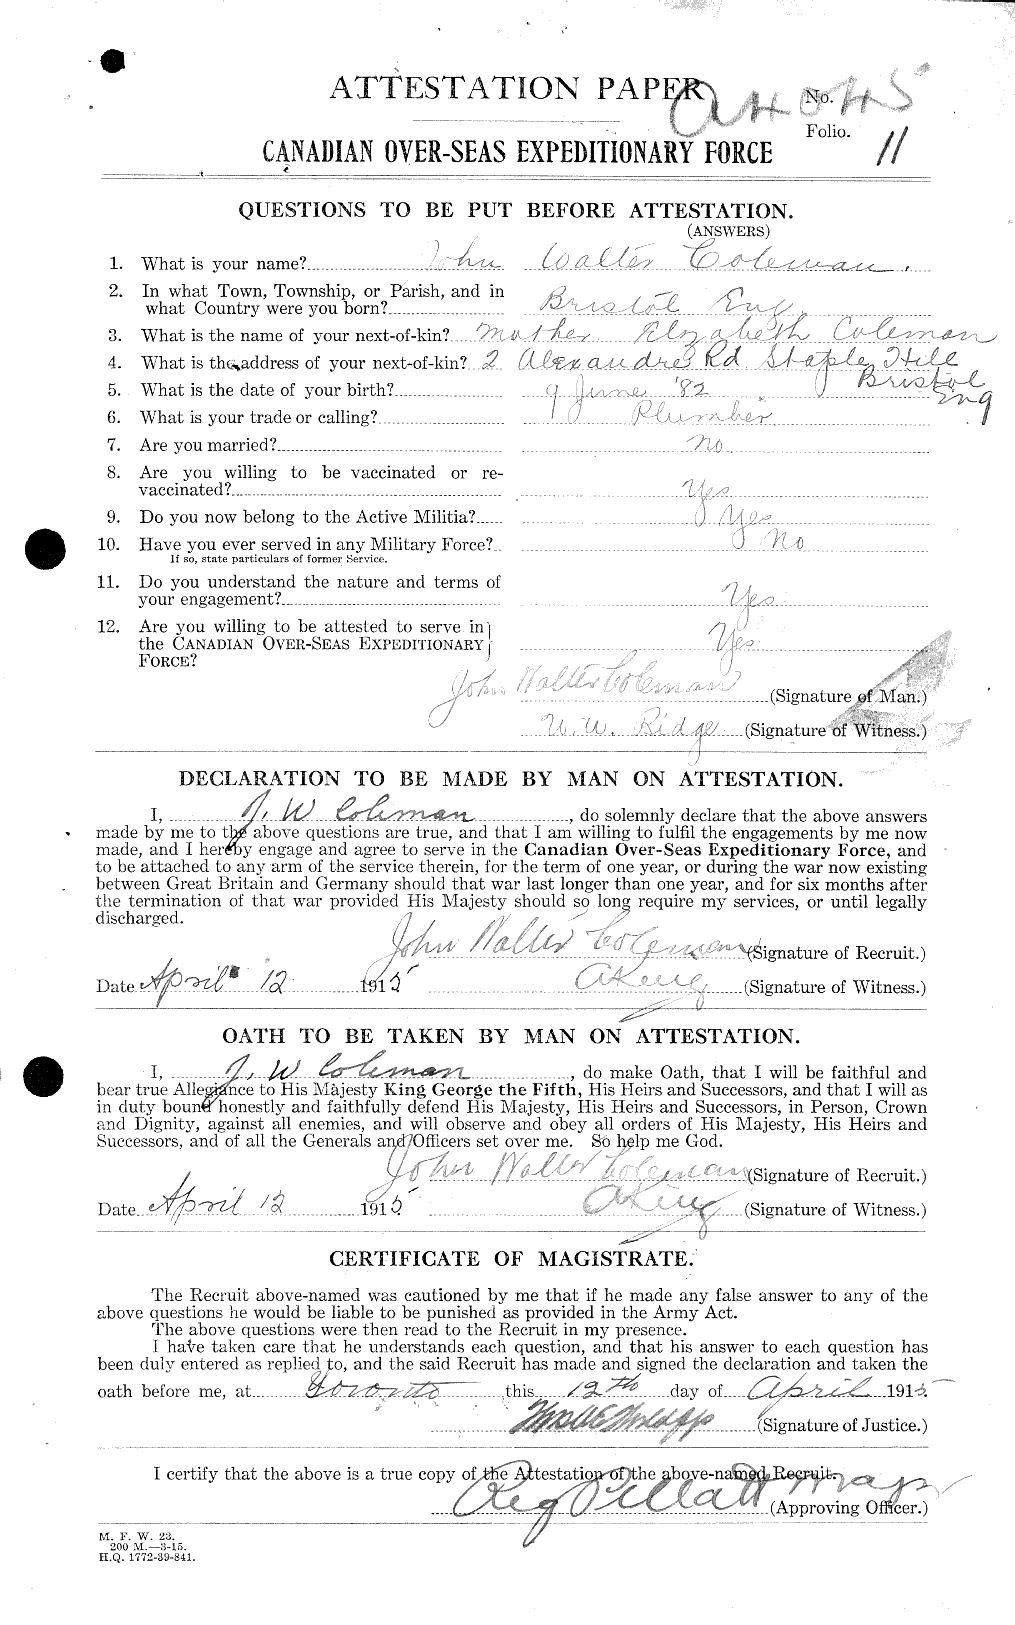 Personnel Records of the First World War - CEF 028222a